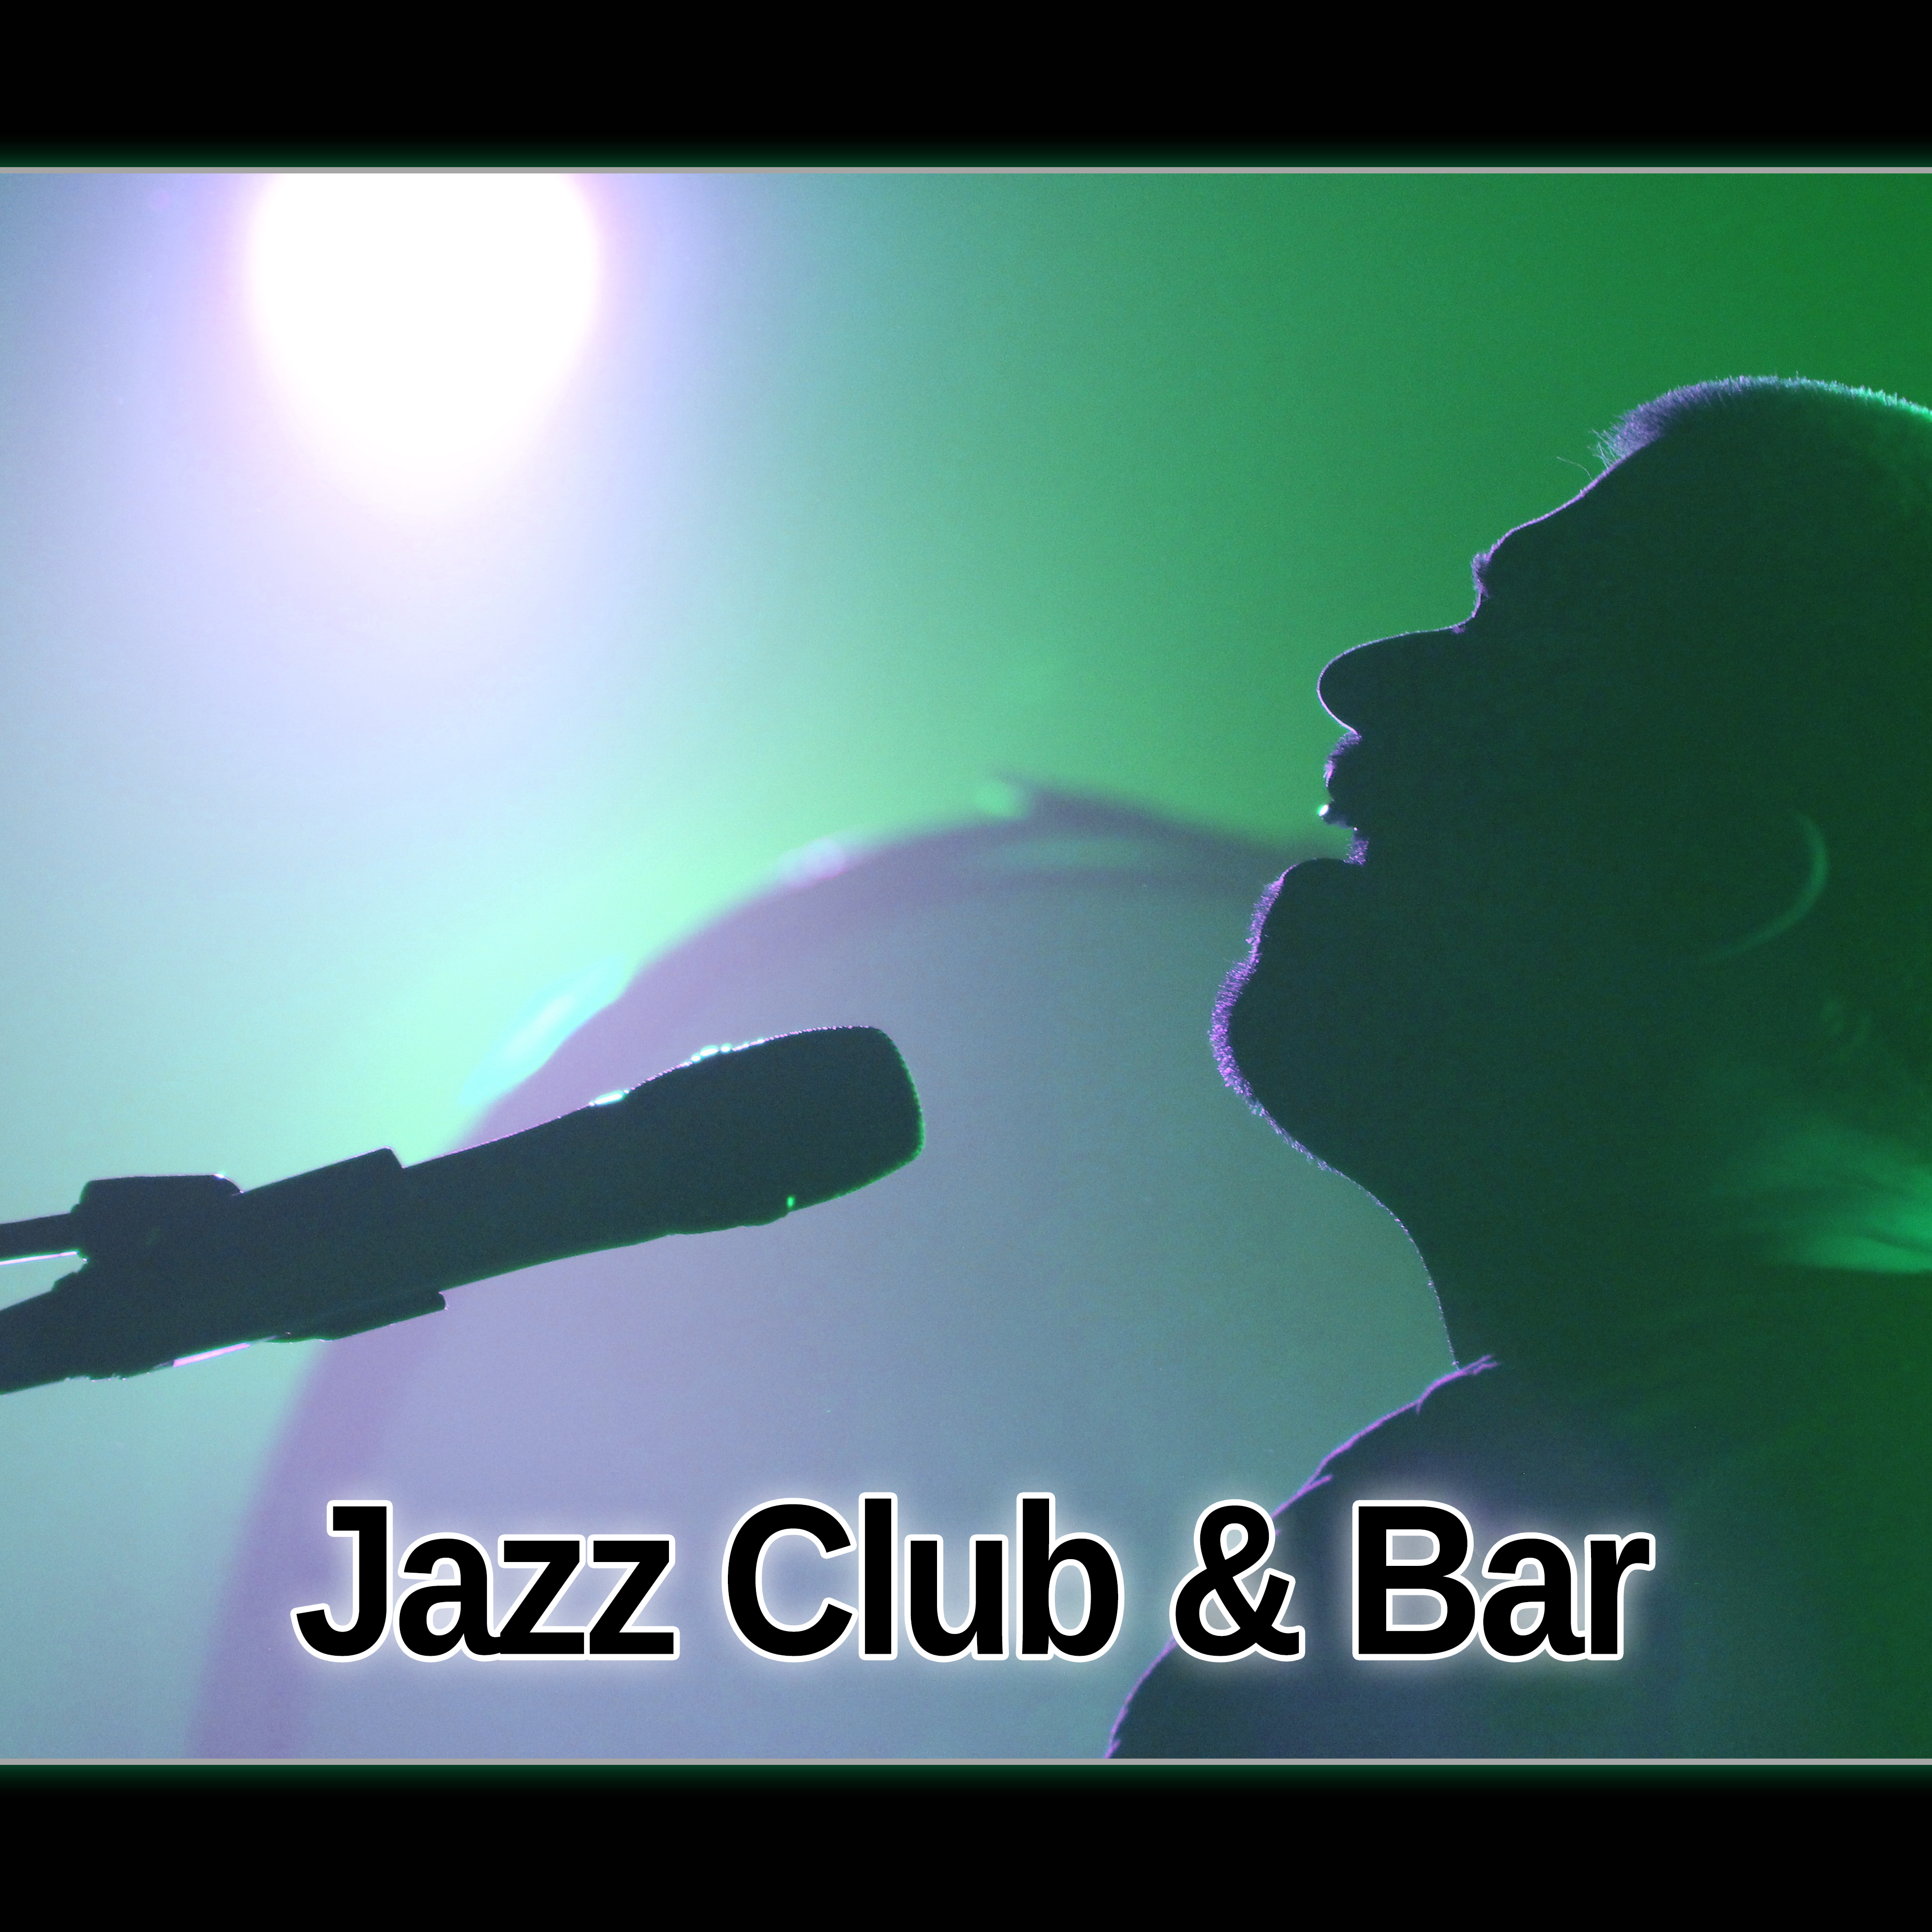 Jazz Club  Bar  Smooth Jazz Music for Background to Club, Relax Time, Mellow Jazz Music for Cocktail Party